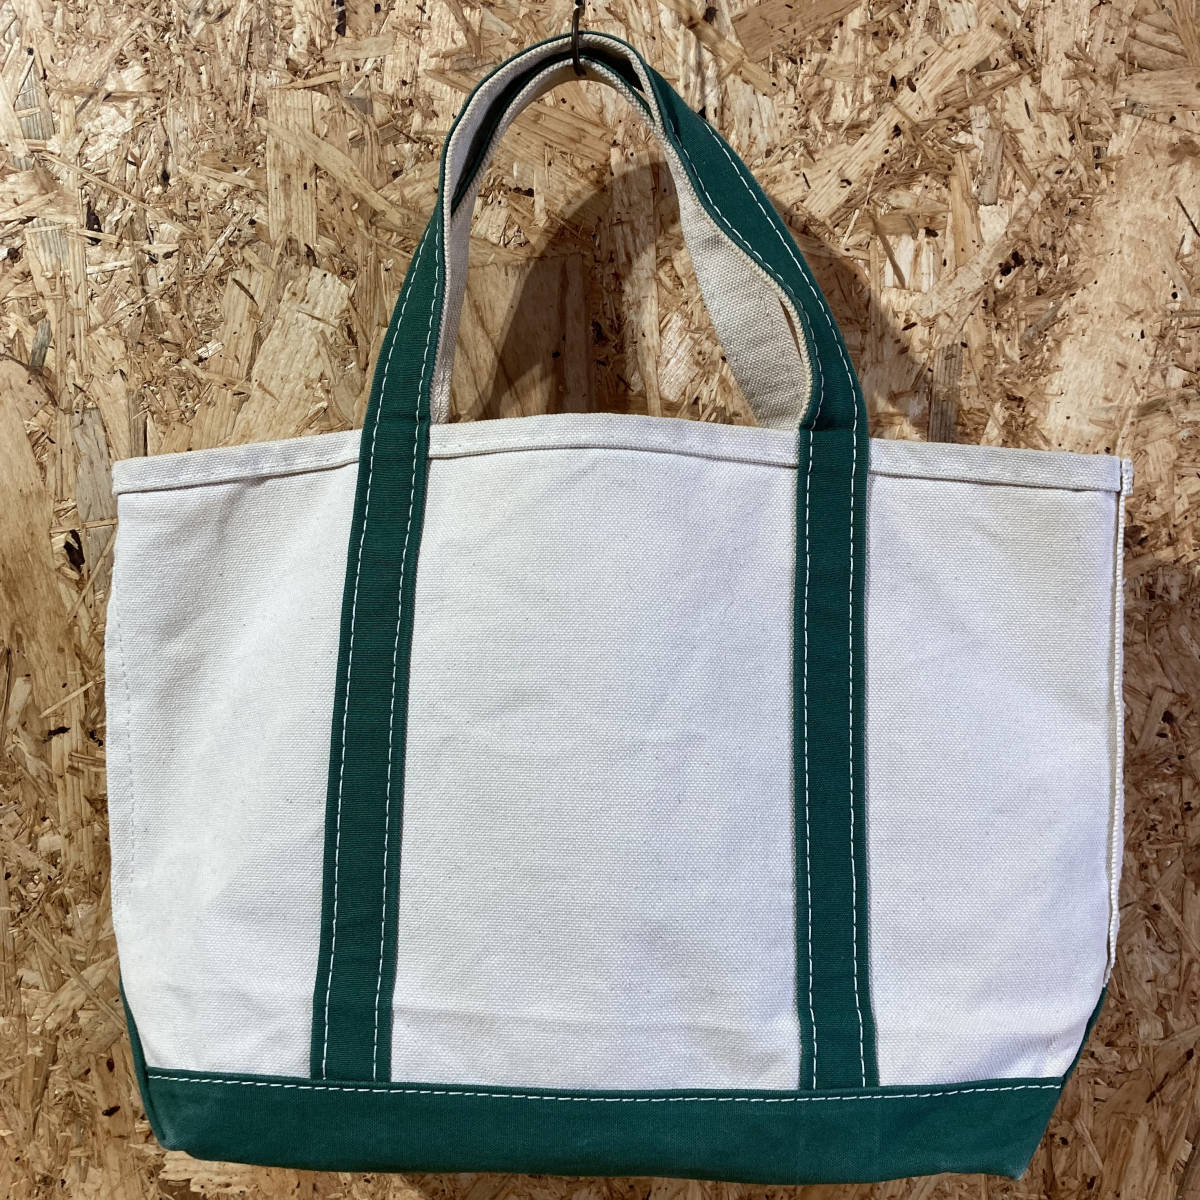 L.L.Bean 100周年 トート バッグ 100th 100 YEARS エルエルビーン BOAT AND TOTE 緑_画像2